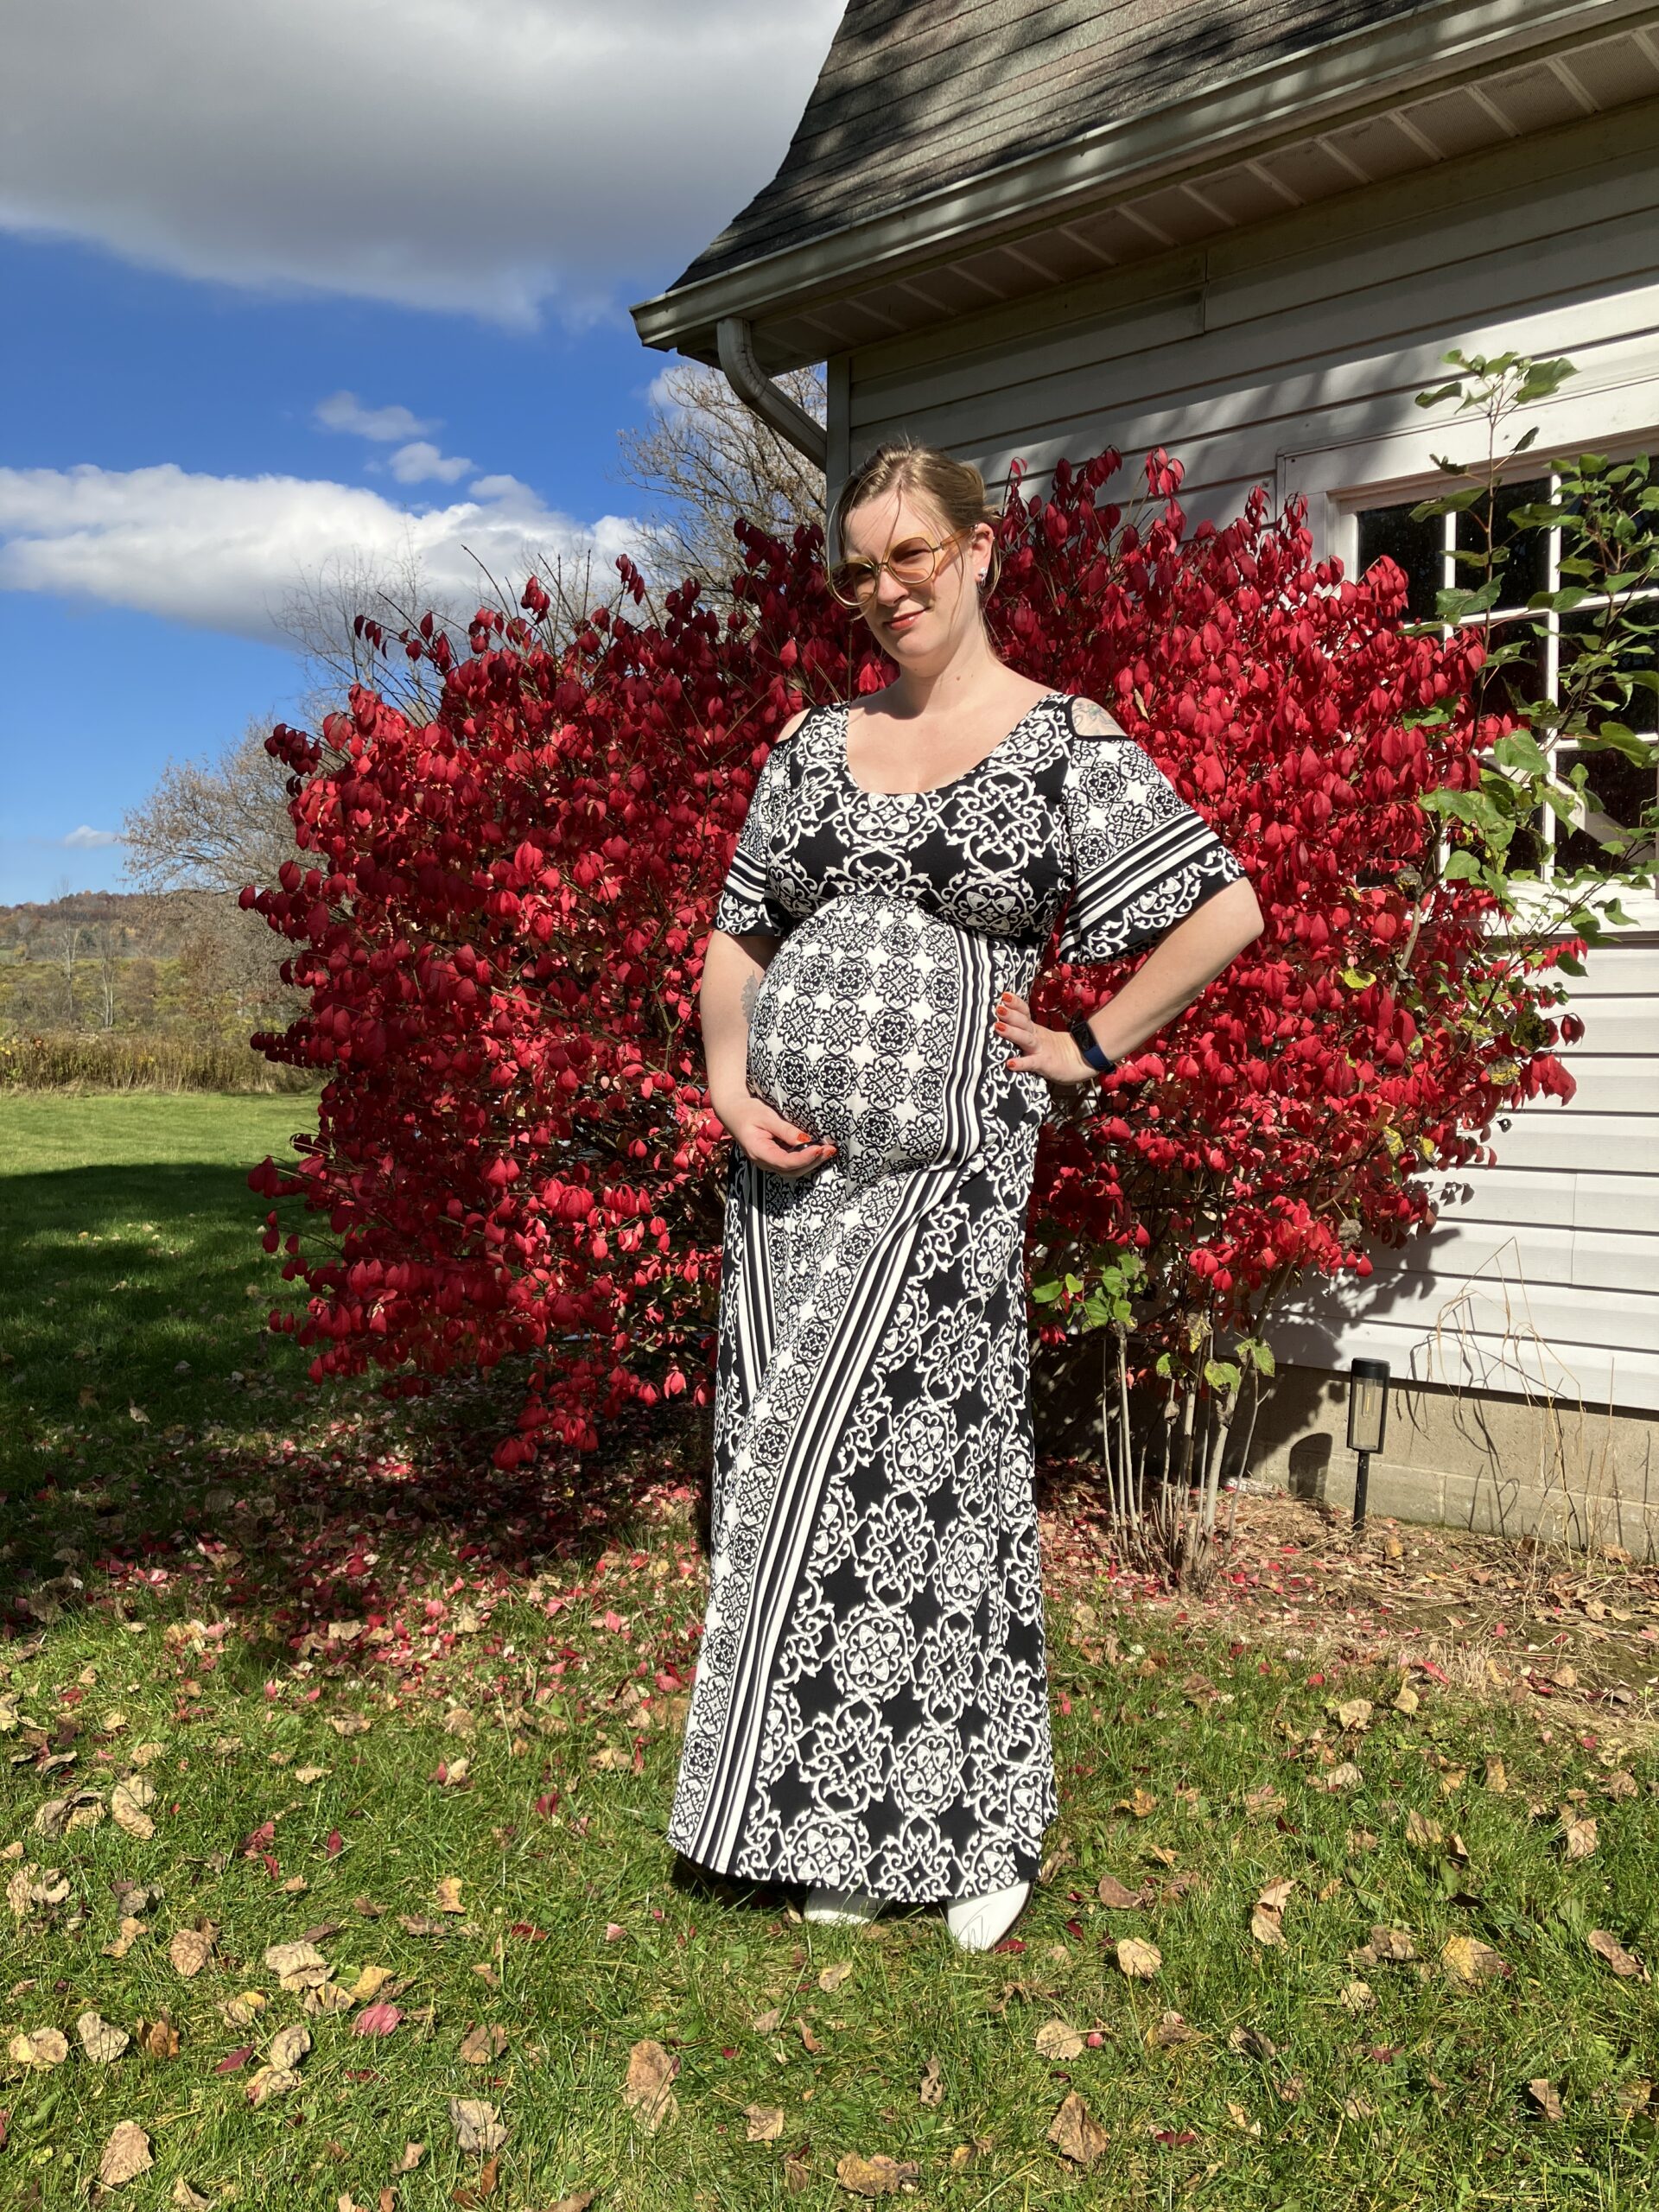 Off the Rack ~ The Full-Bust Maternity Clothing Landscape STINKS –